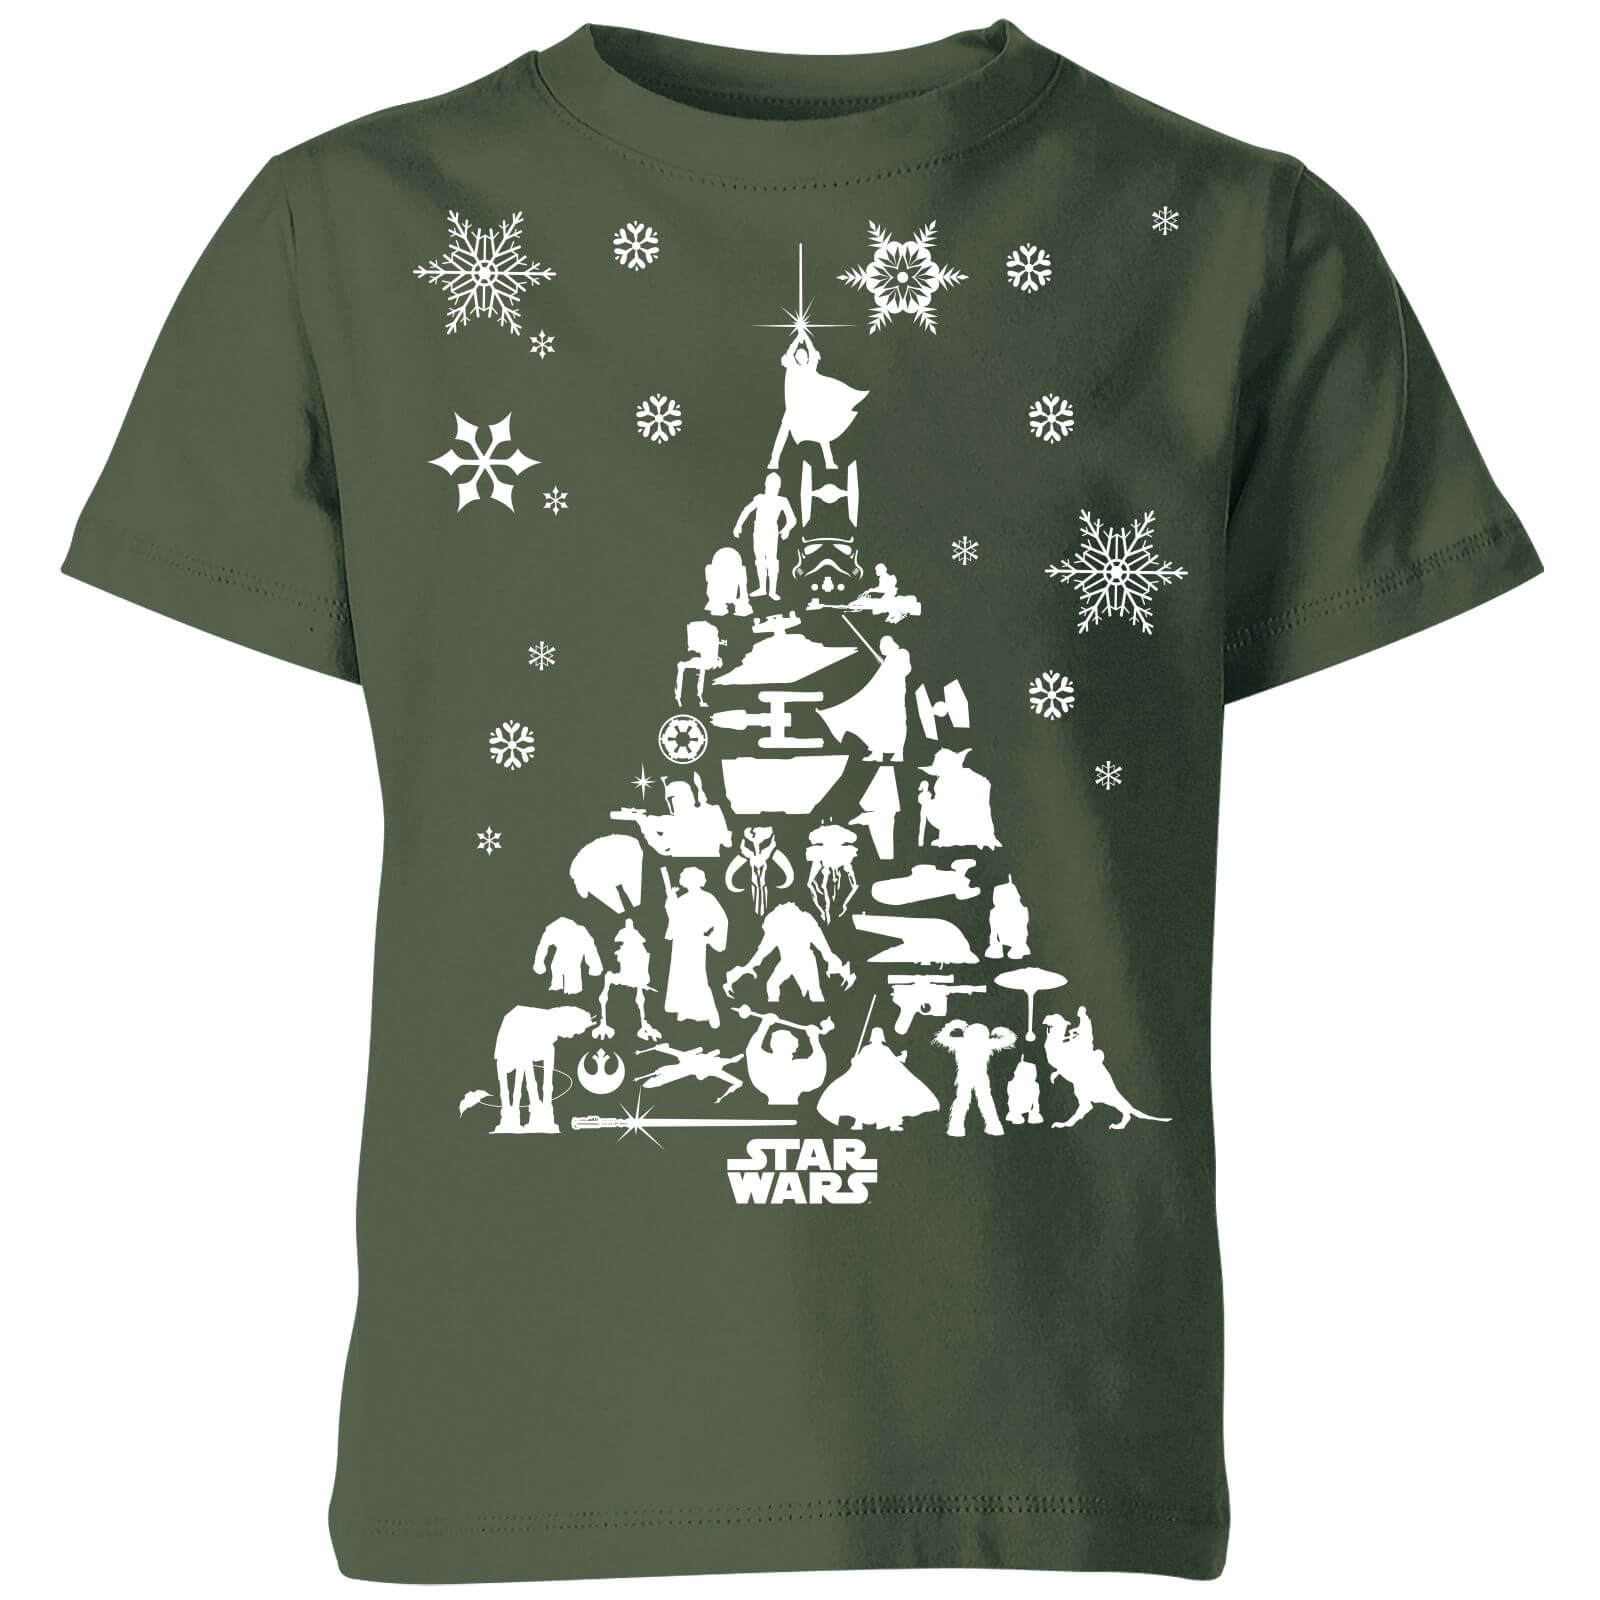 Star Wars Character Christmas Tree Kids' Christmas T-Shirt - Forest Green - 7-8 Years - Forest Green